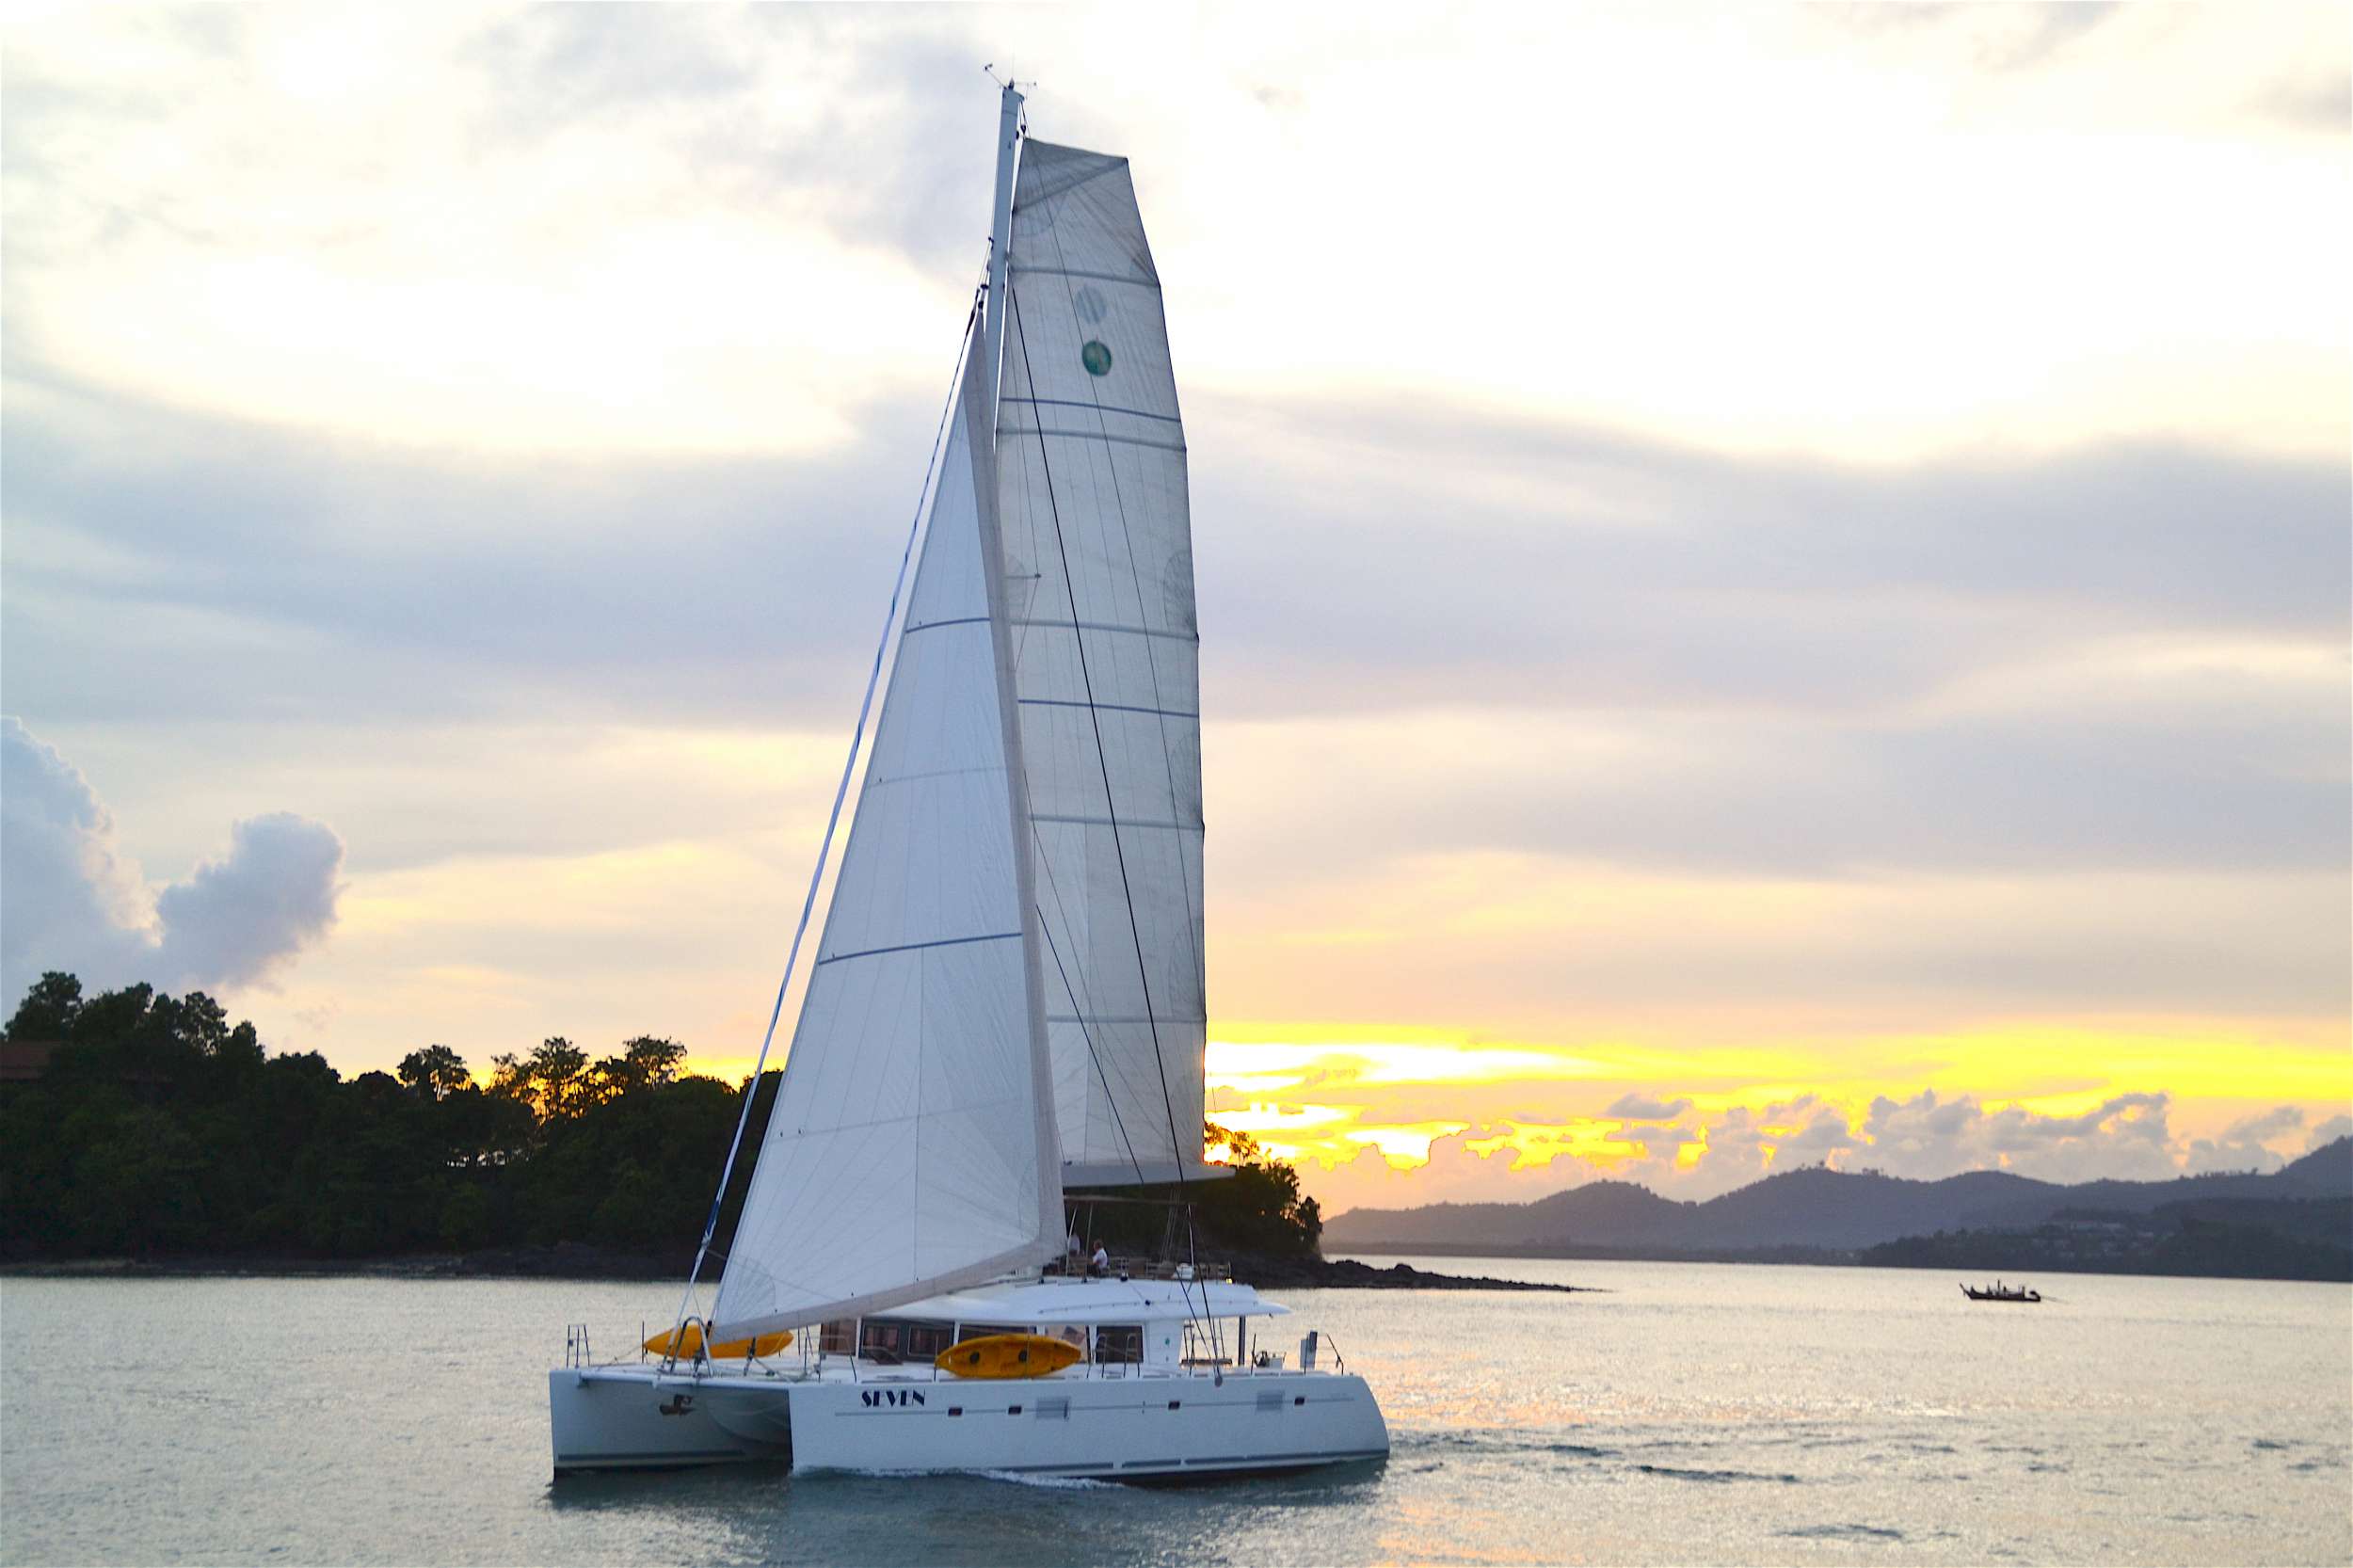 00SEVEN - Yacht Charter Phuket & Boat hire in SE Asia 2